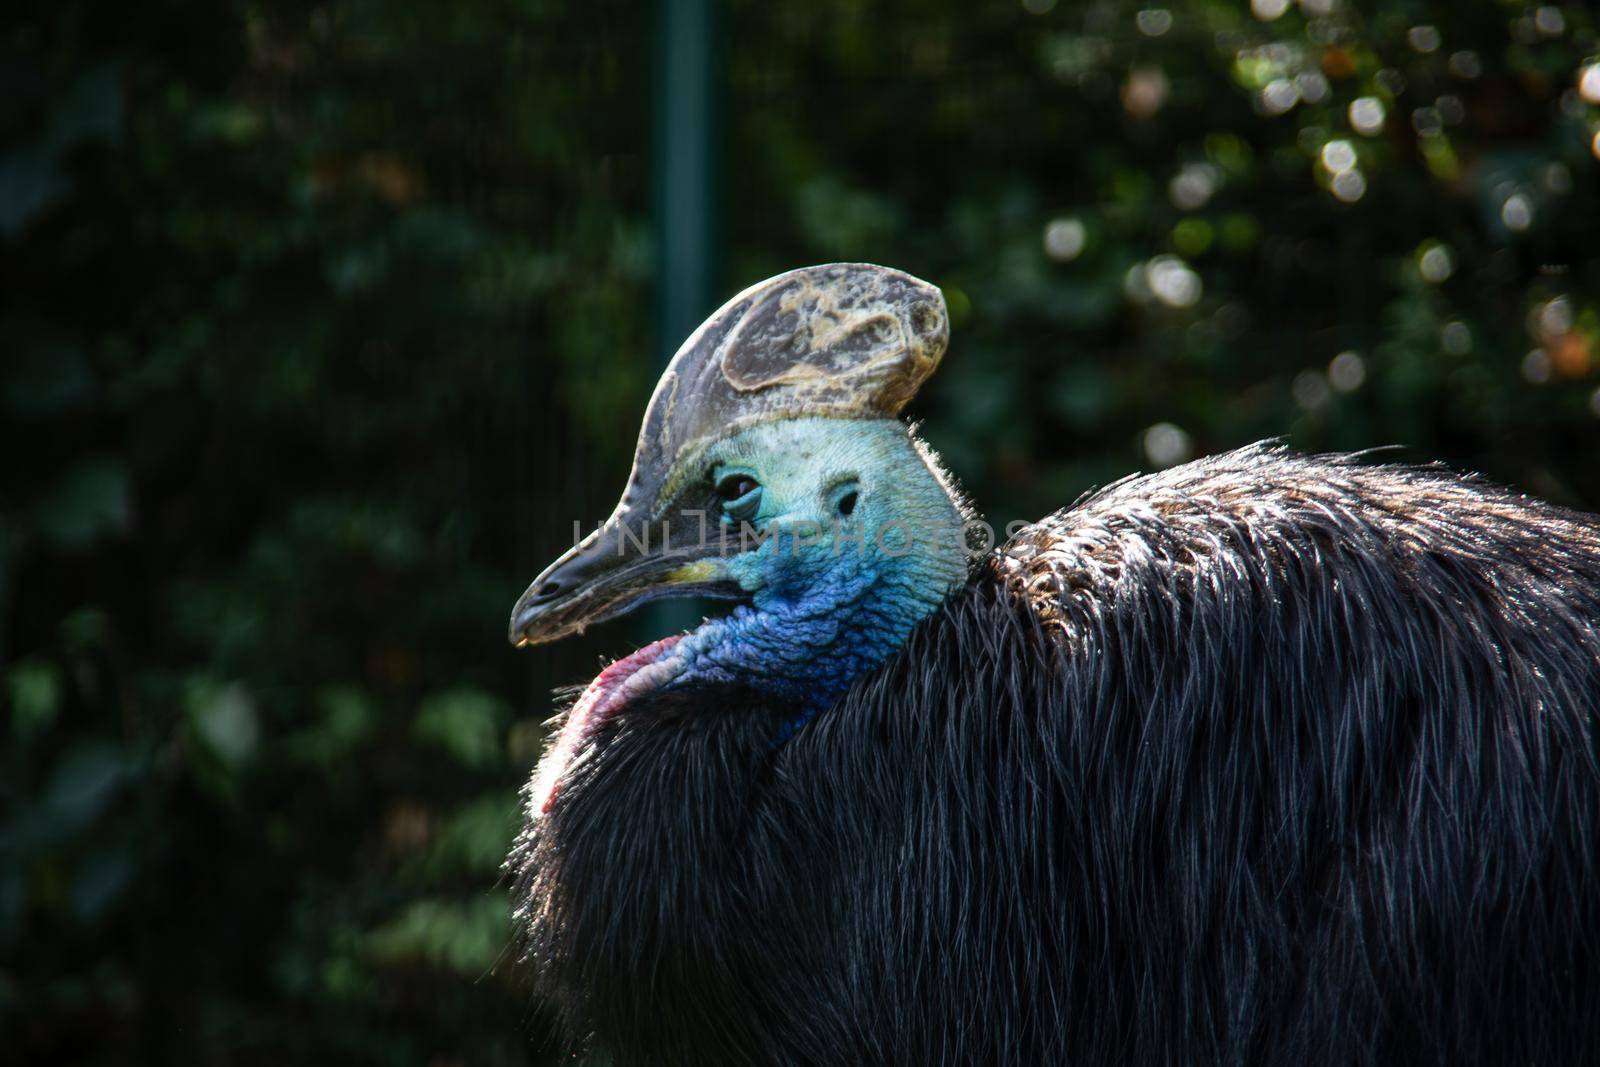 Large cassowary bird in the shade under trees